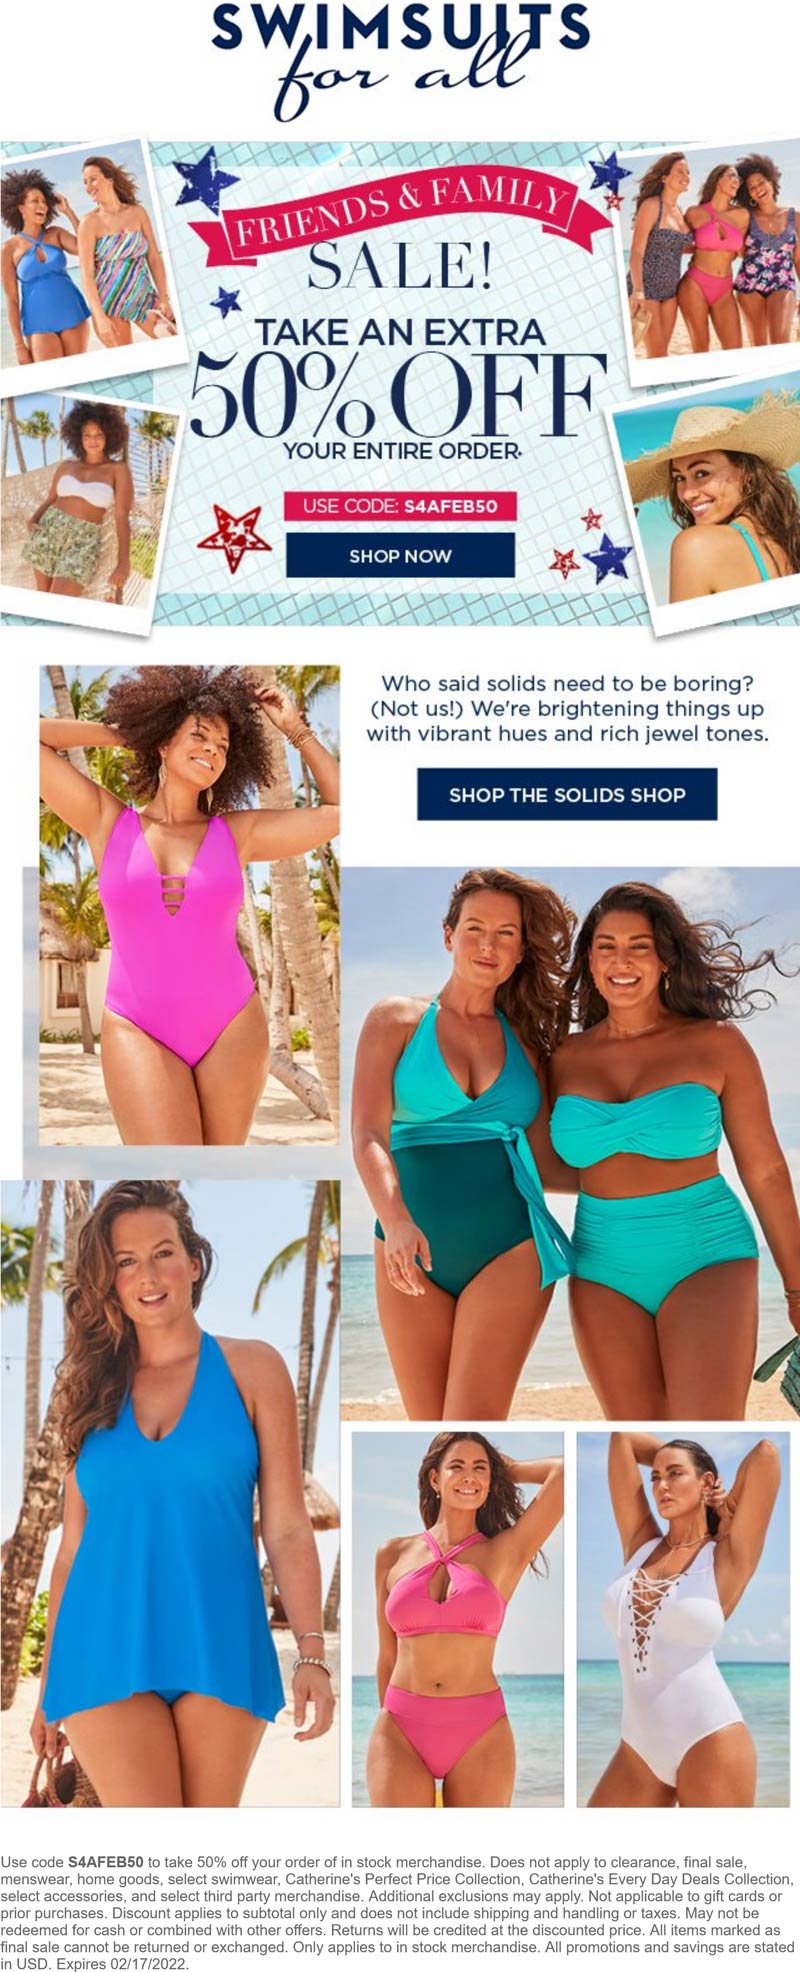 Swimsuits For All stores Coupon  50% off everything at Swimsuits For All via promo code S4AFEB50 #swimsuitsforall 